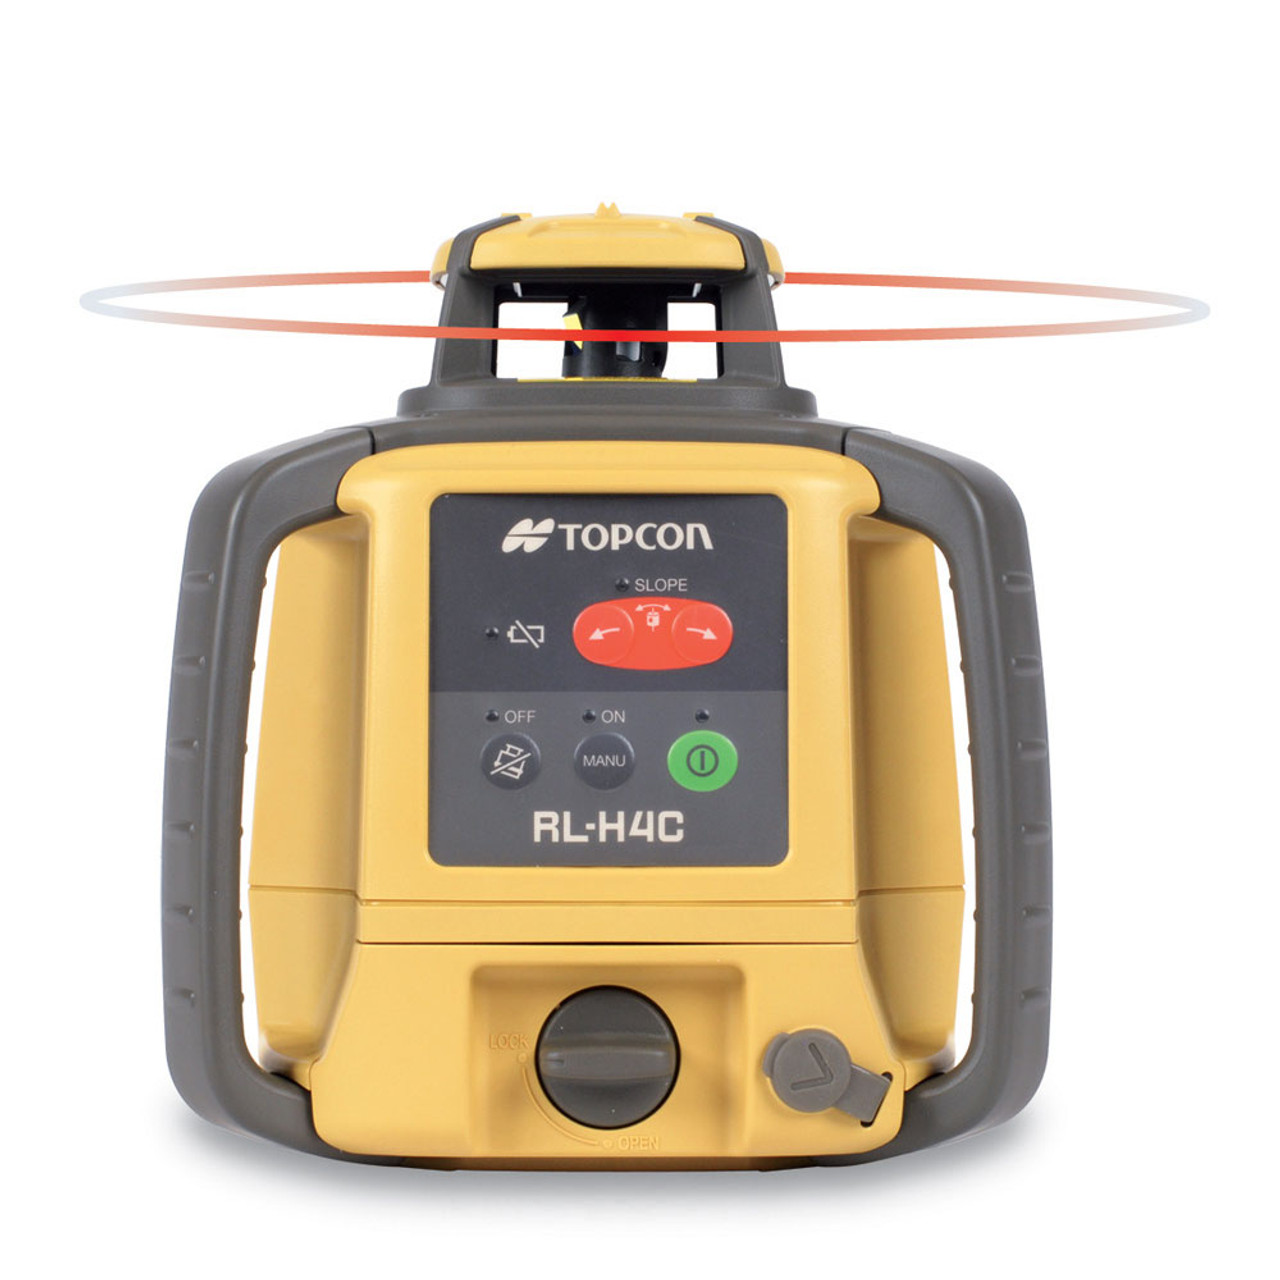 Topcon RL-H4C Self-Leveling Laser RB Kit with LS-100D Receiver and 